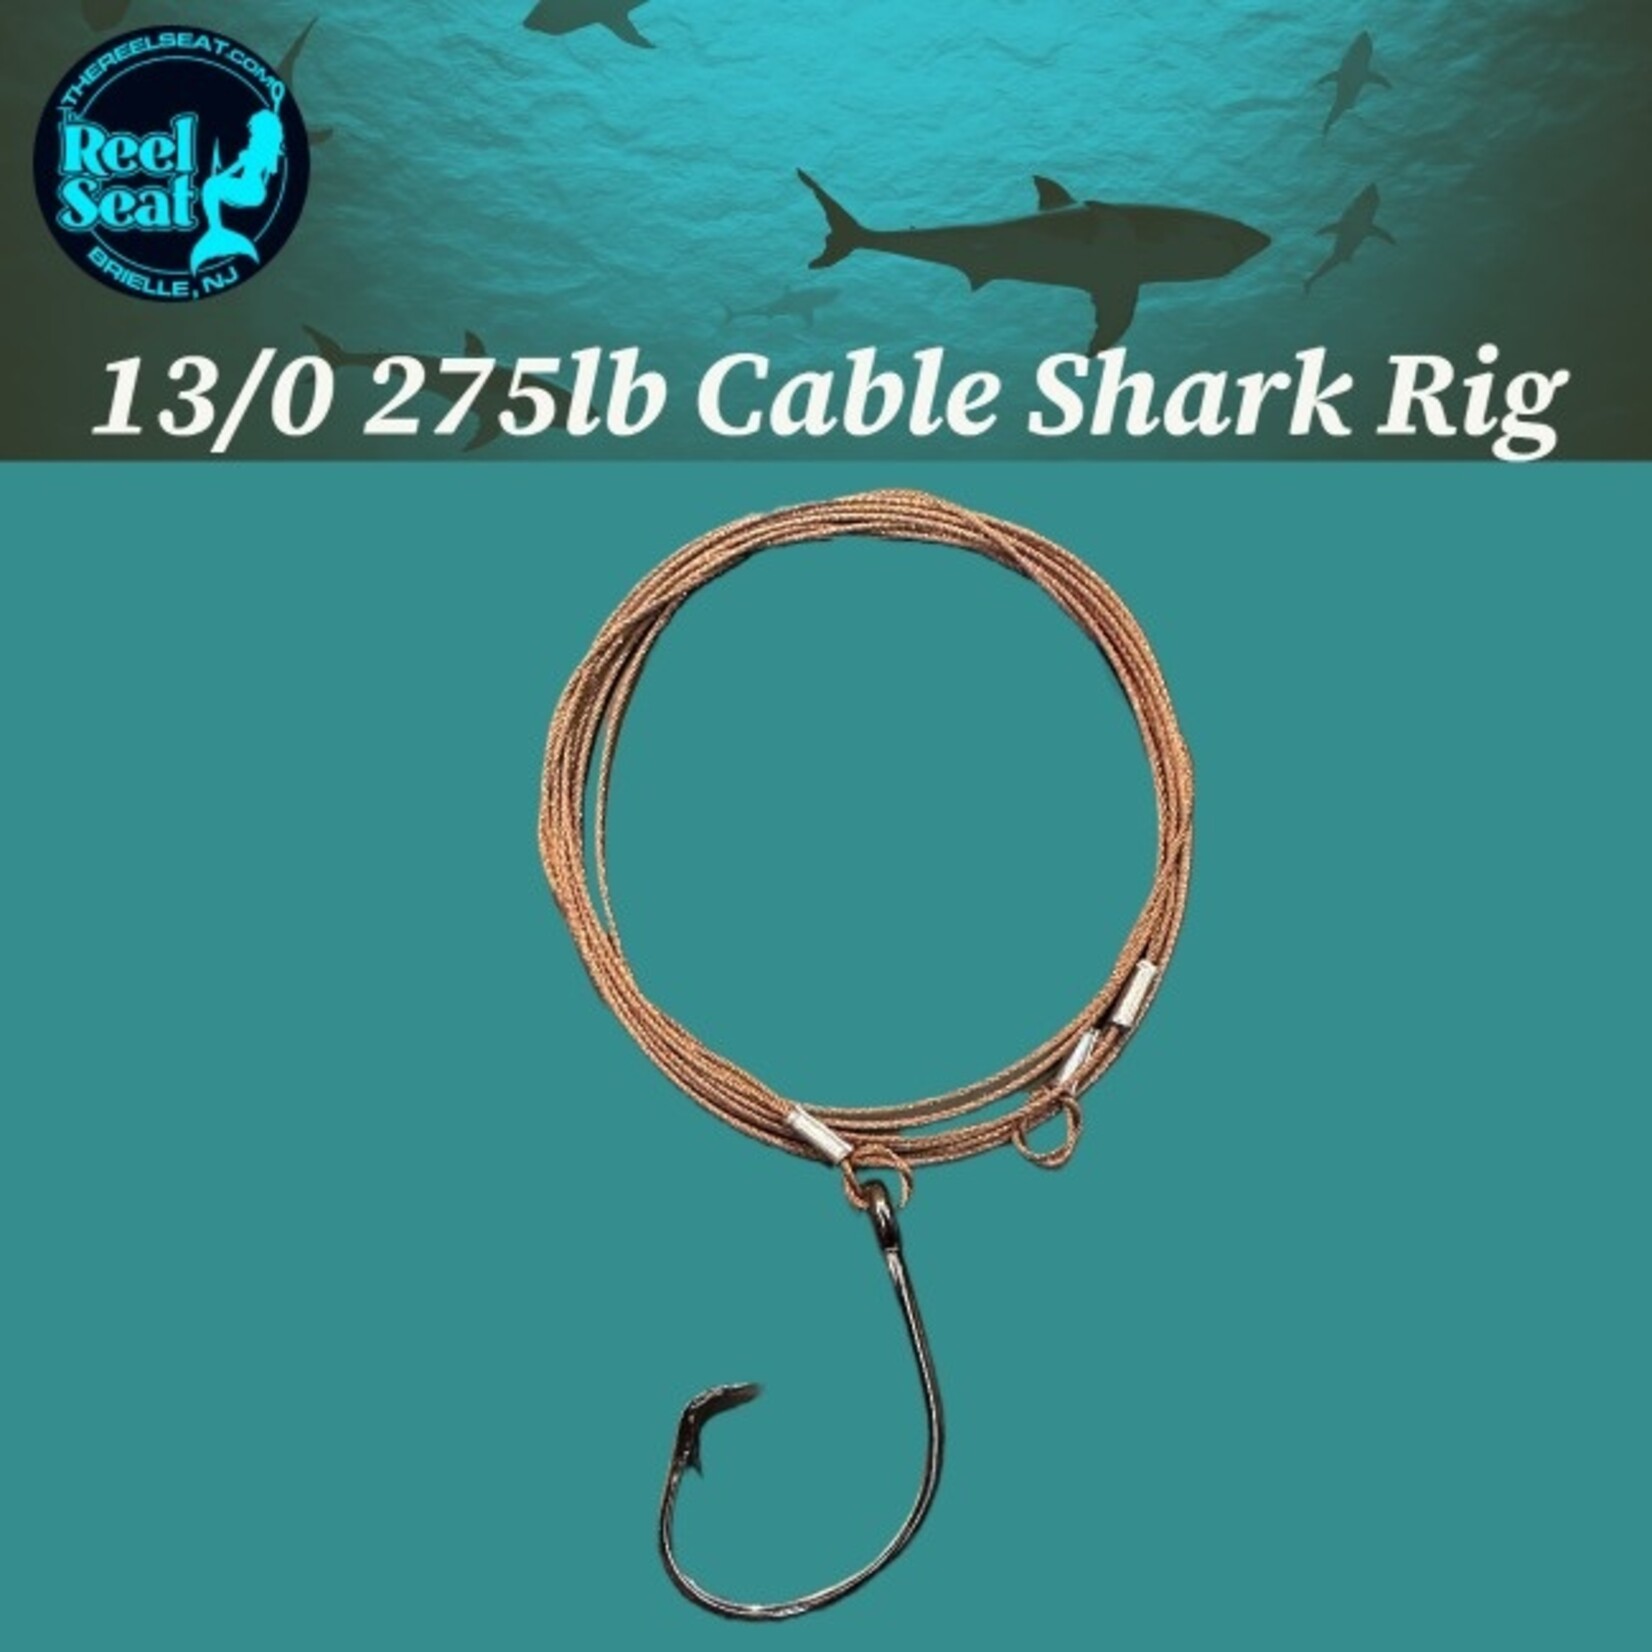 The Reel Seat RS 13/0 275lb Cable Shark Rig